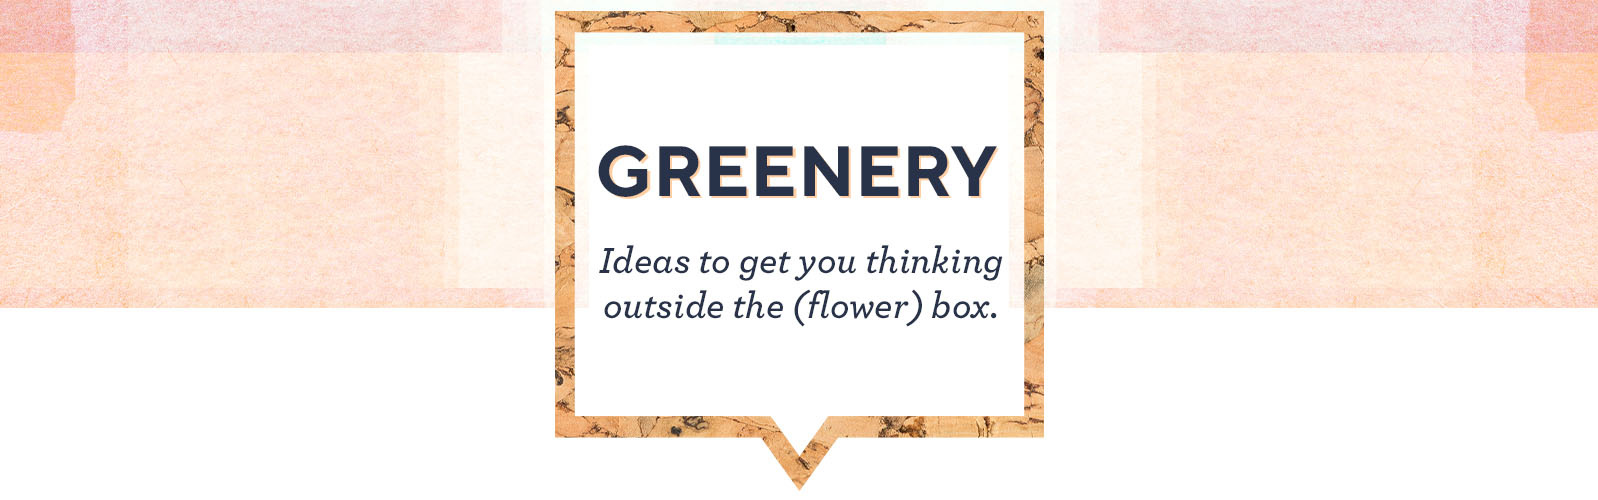 Greenery - Ideas to get you thinking outside the (flower) box.